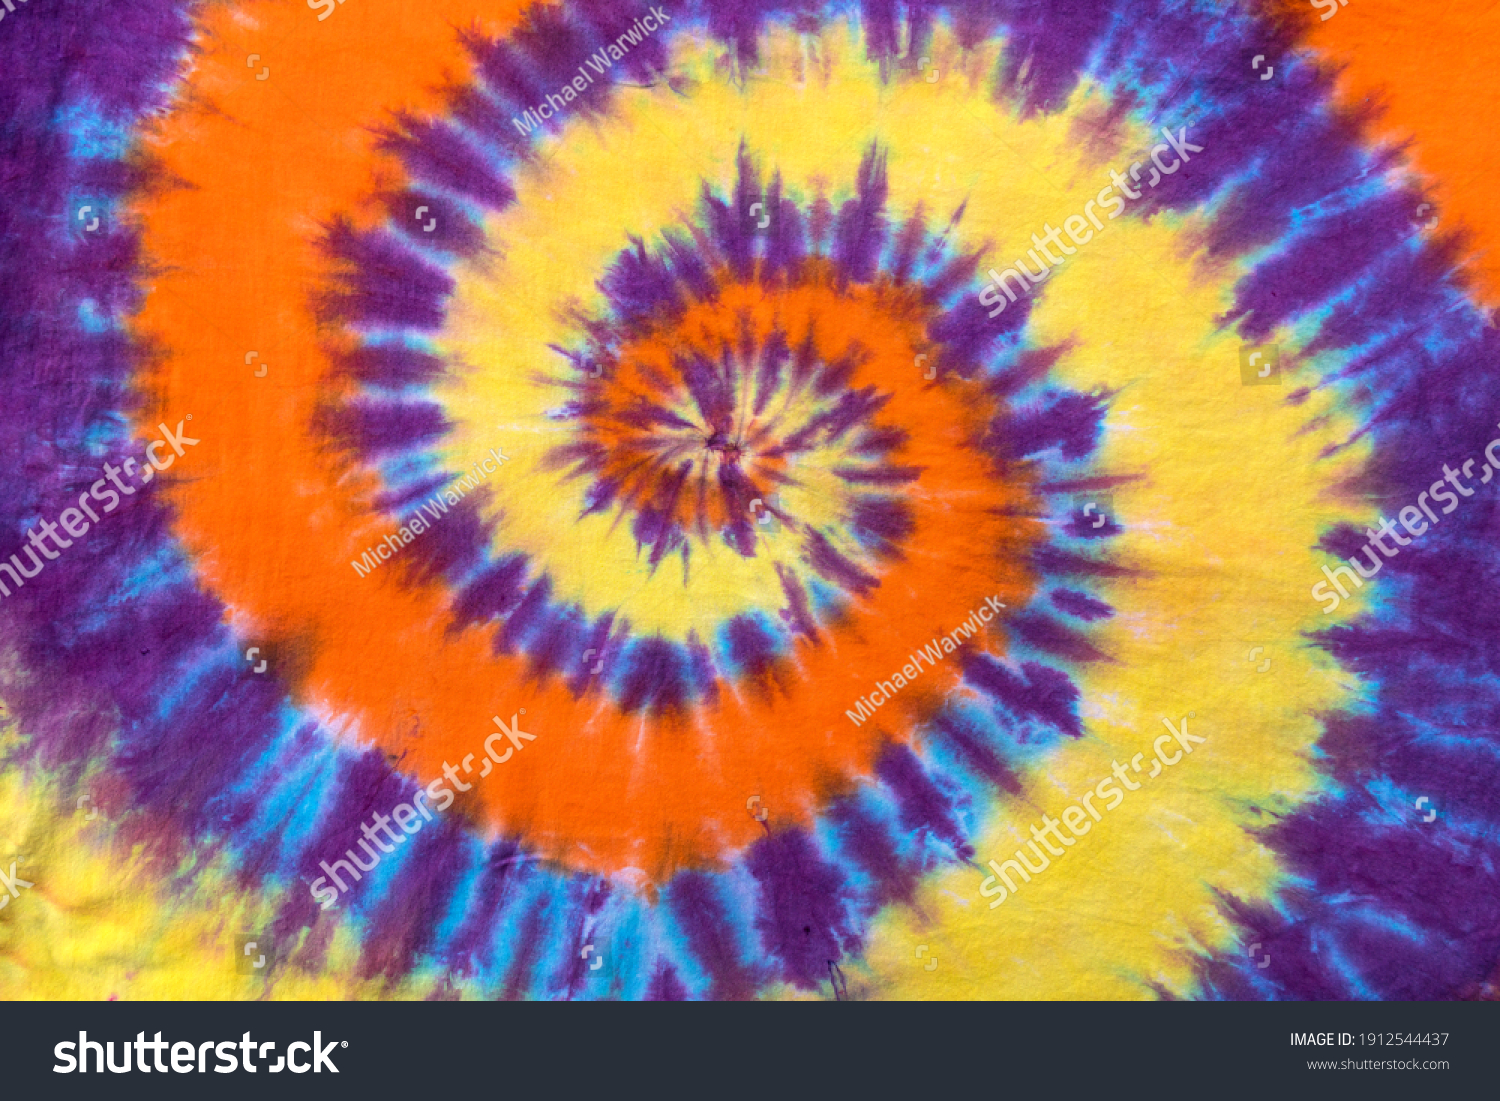 Fashionable Retro Abstract Psychedelic Tie Dye Swirl Design. #1912544437